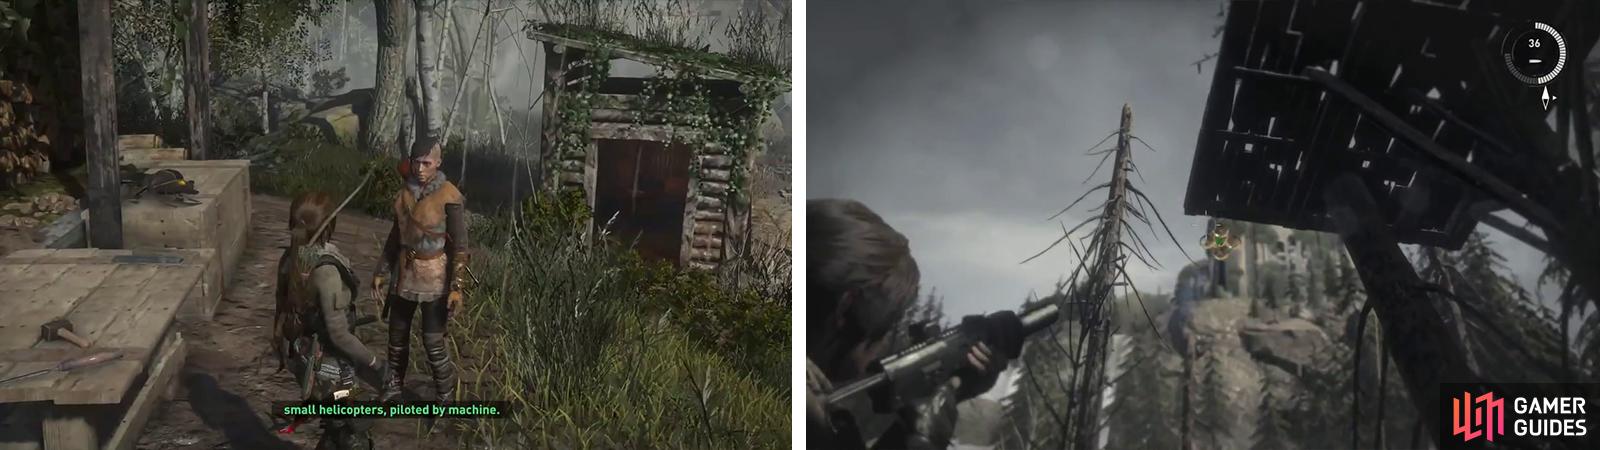 After accepting the side-mission (left) hunt down and shoot the drones (right).